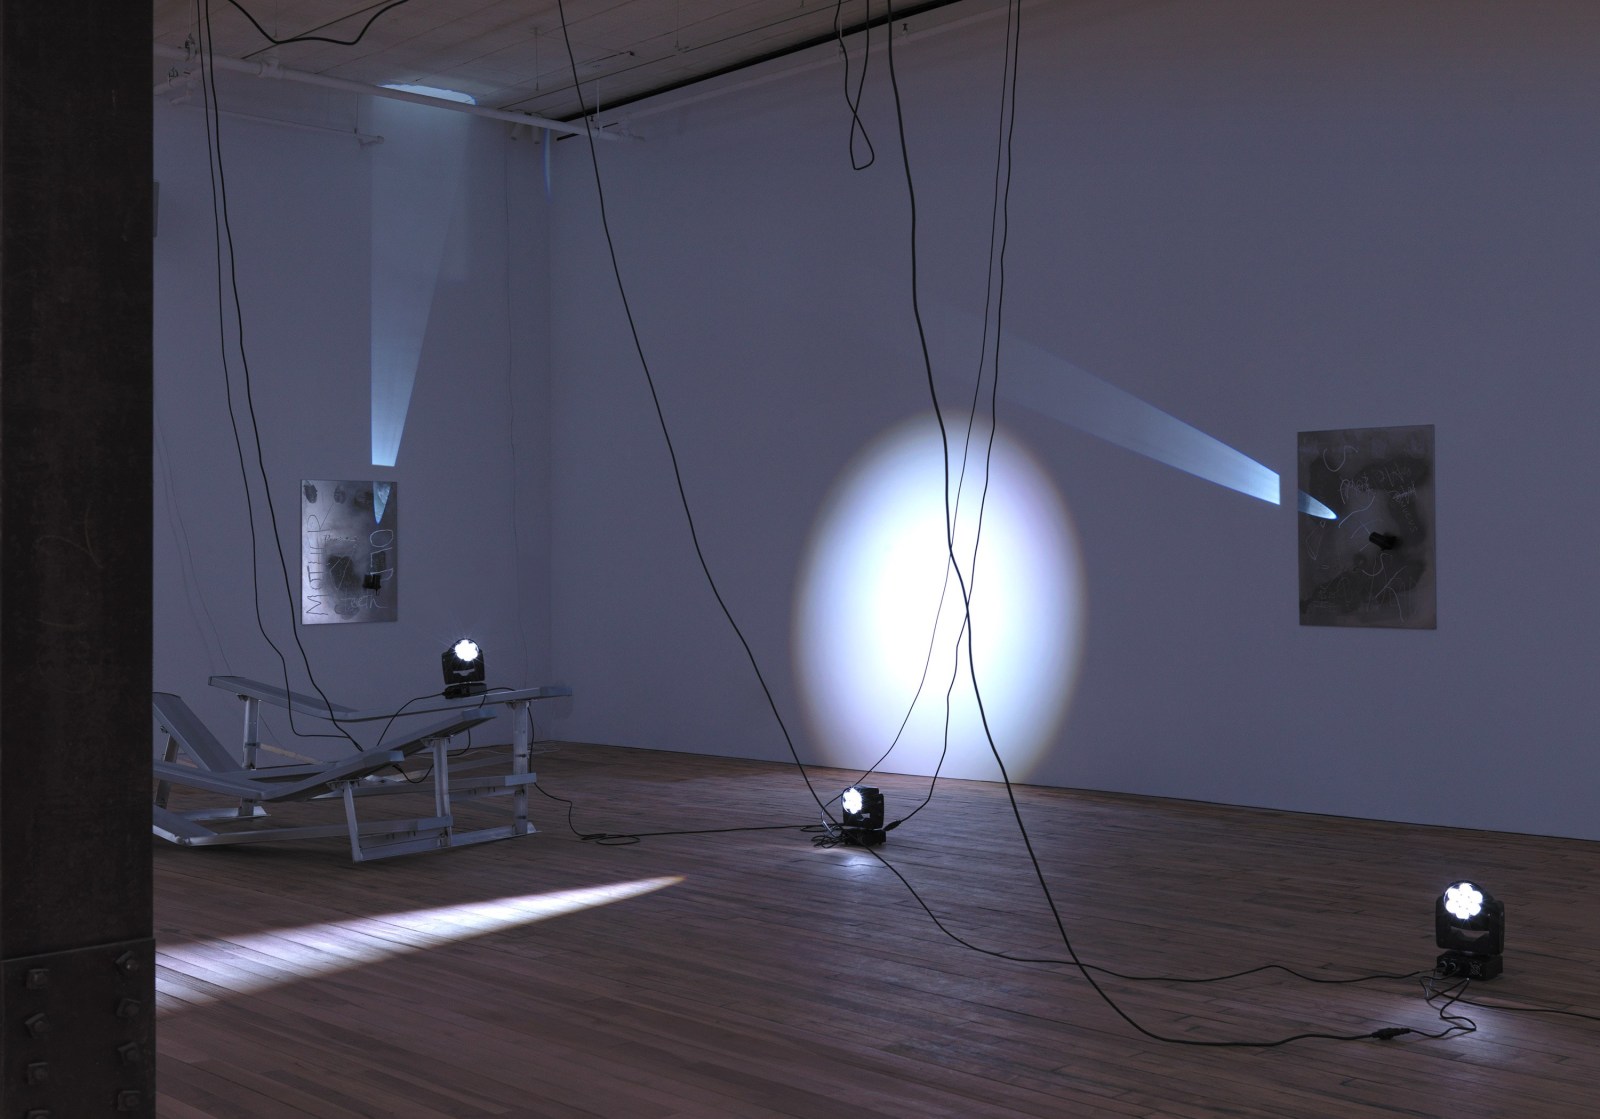 Installation view, Nikita Gale, END OF SUBJECT, 52 Walker, New York, 2022